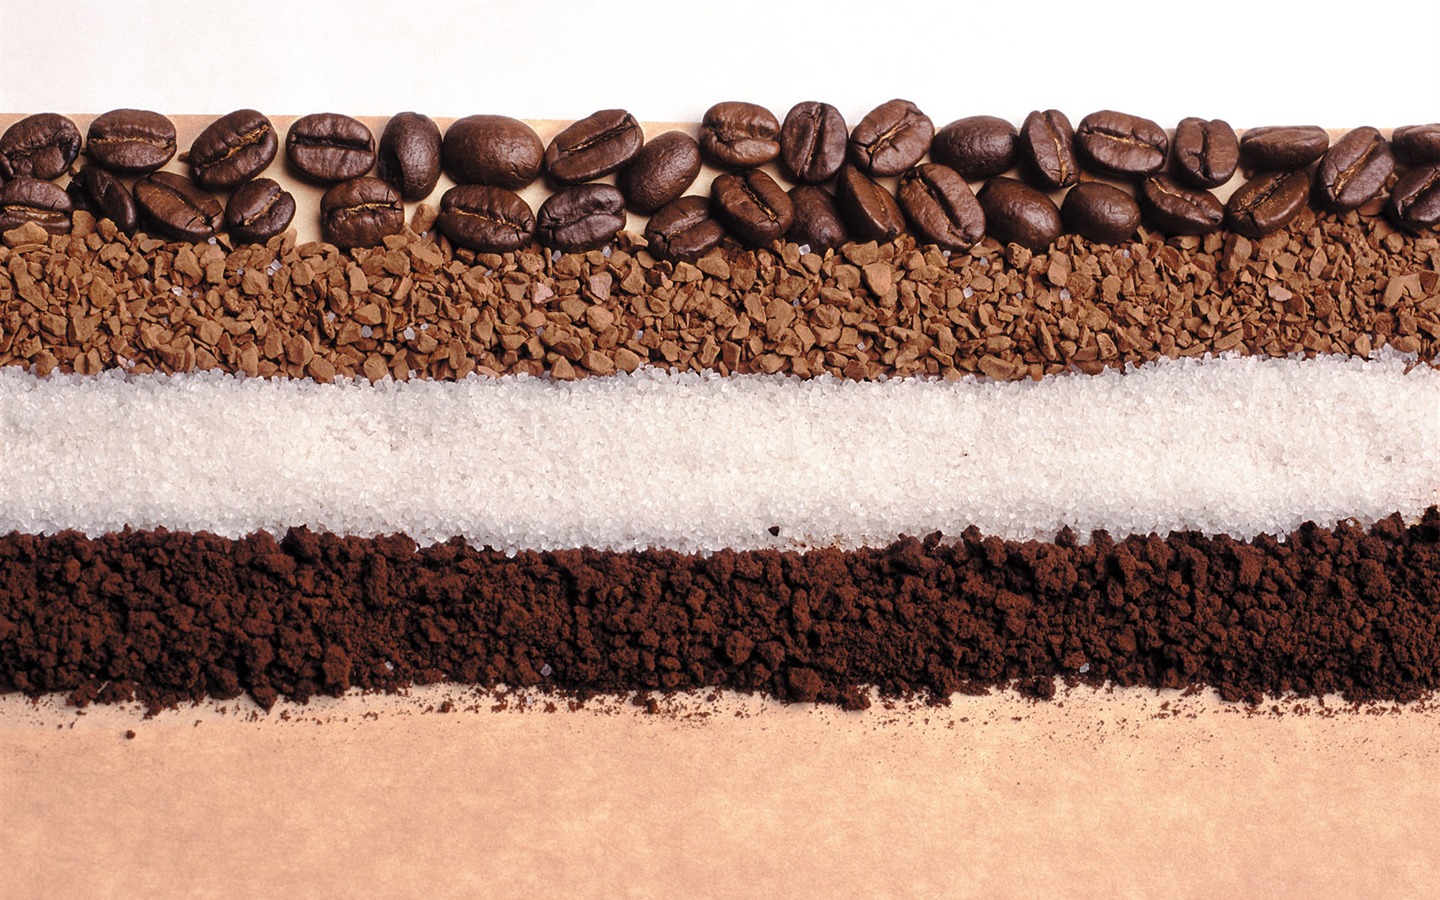 Coffee feature wallpaper (6) #15 - 1440x900